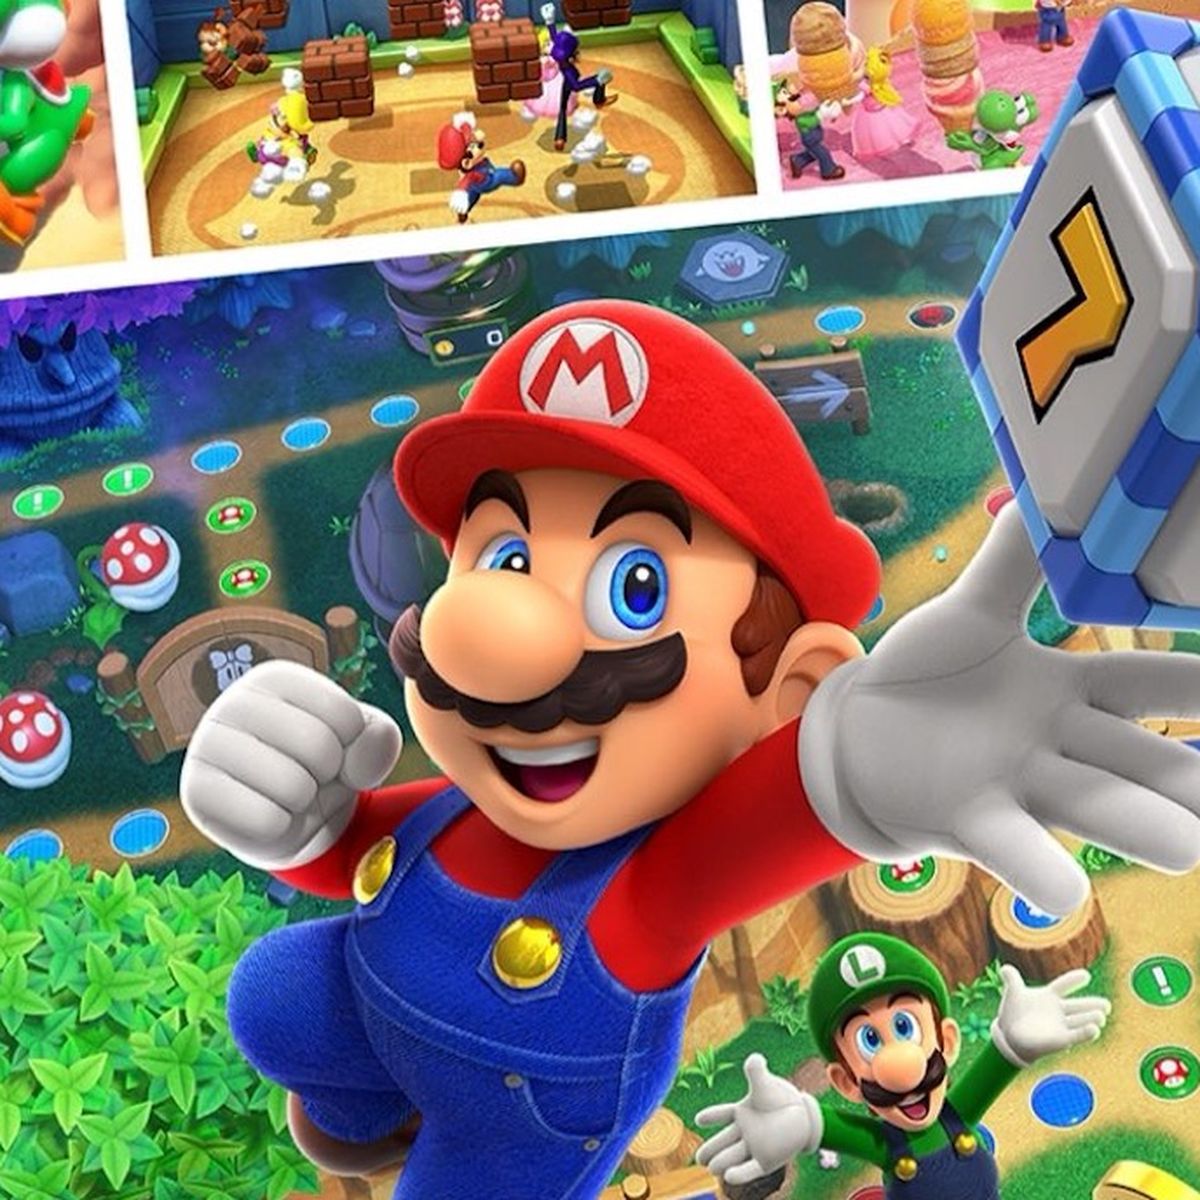 Mario Party Superstars Vs. Super Mario Party: Which Is Better?